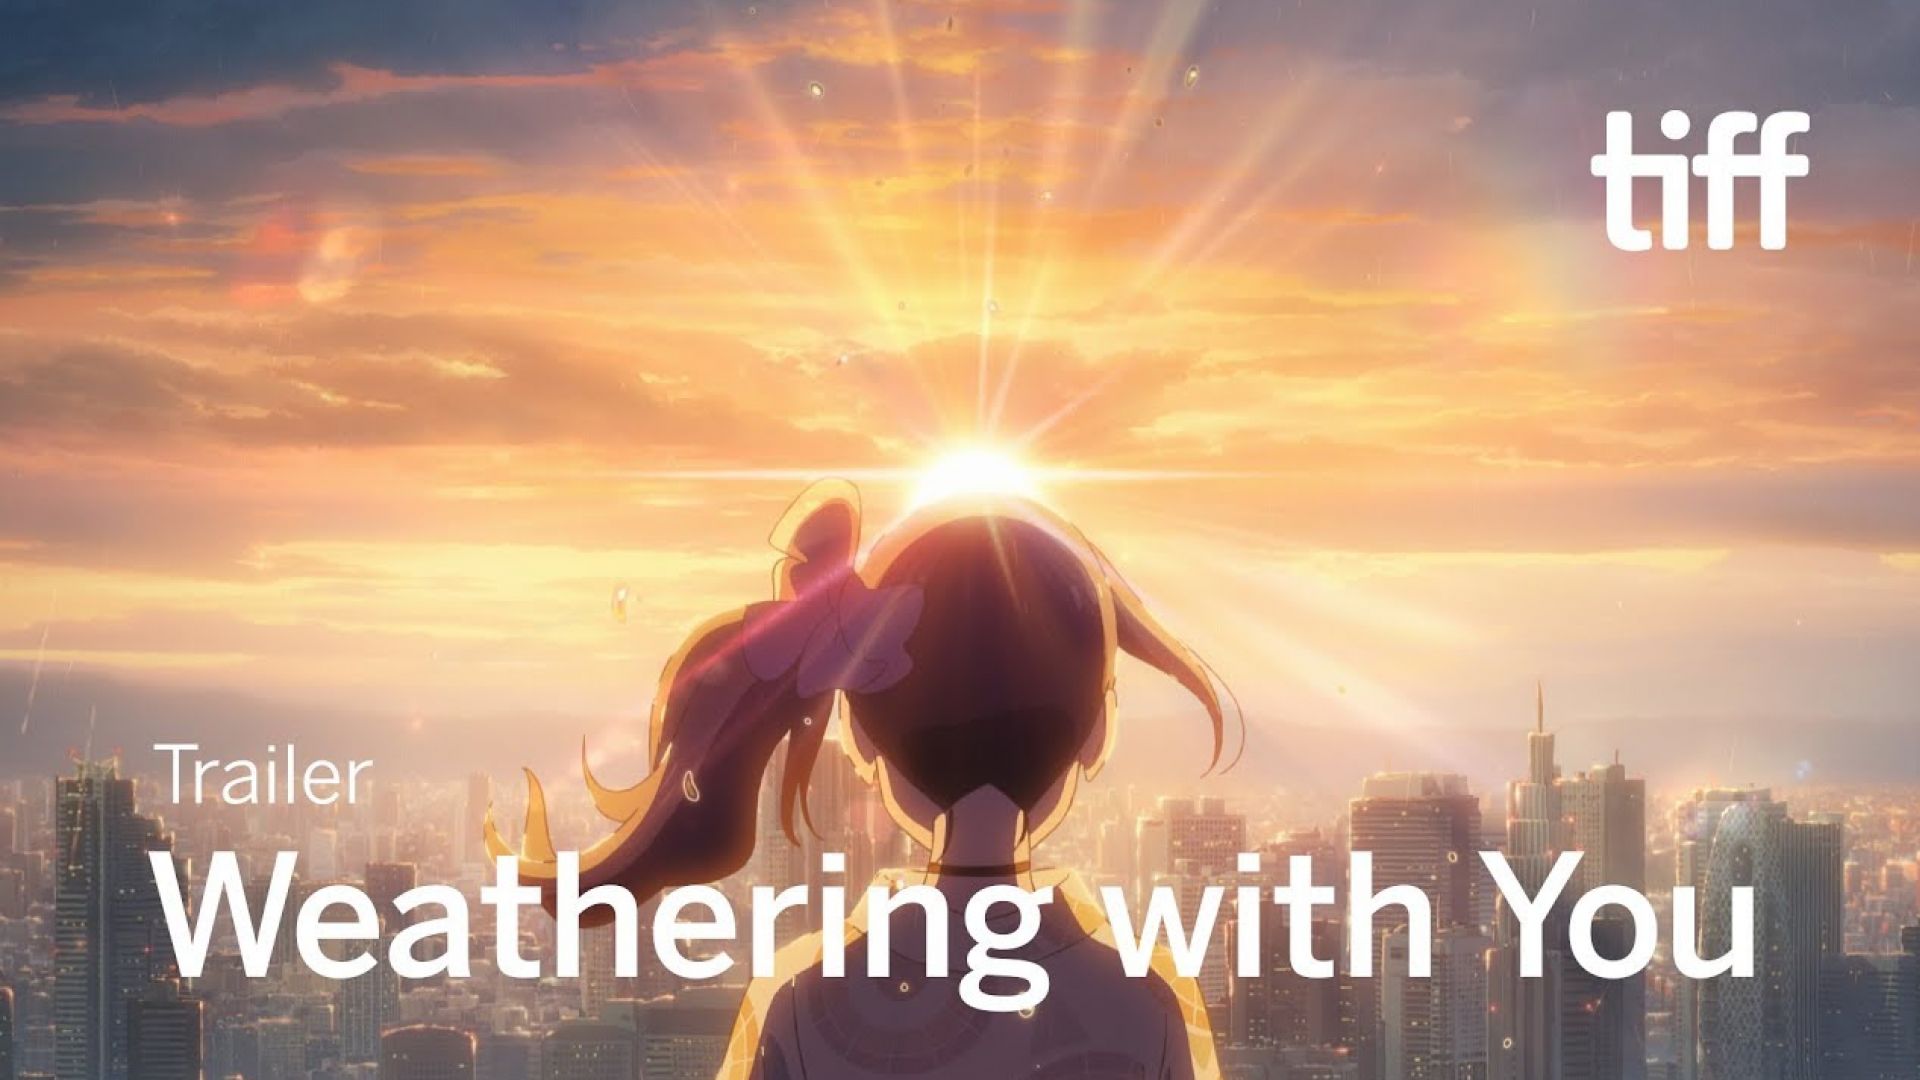 'Weathering With You' trailer